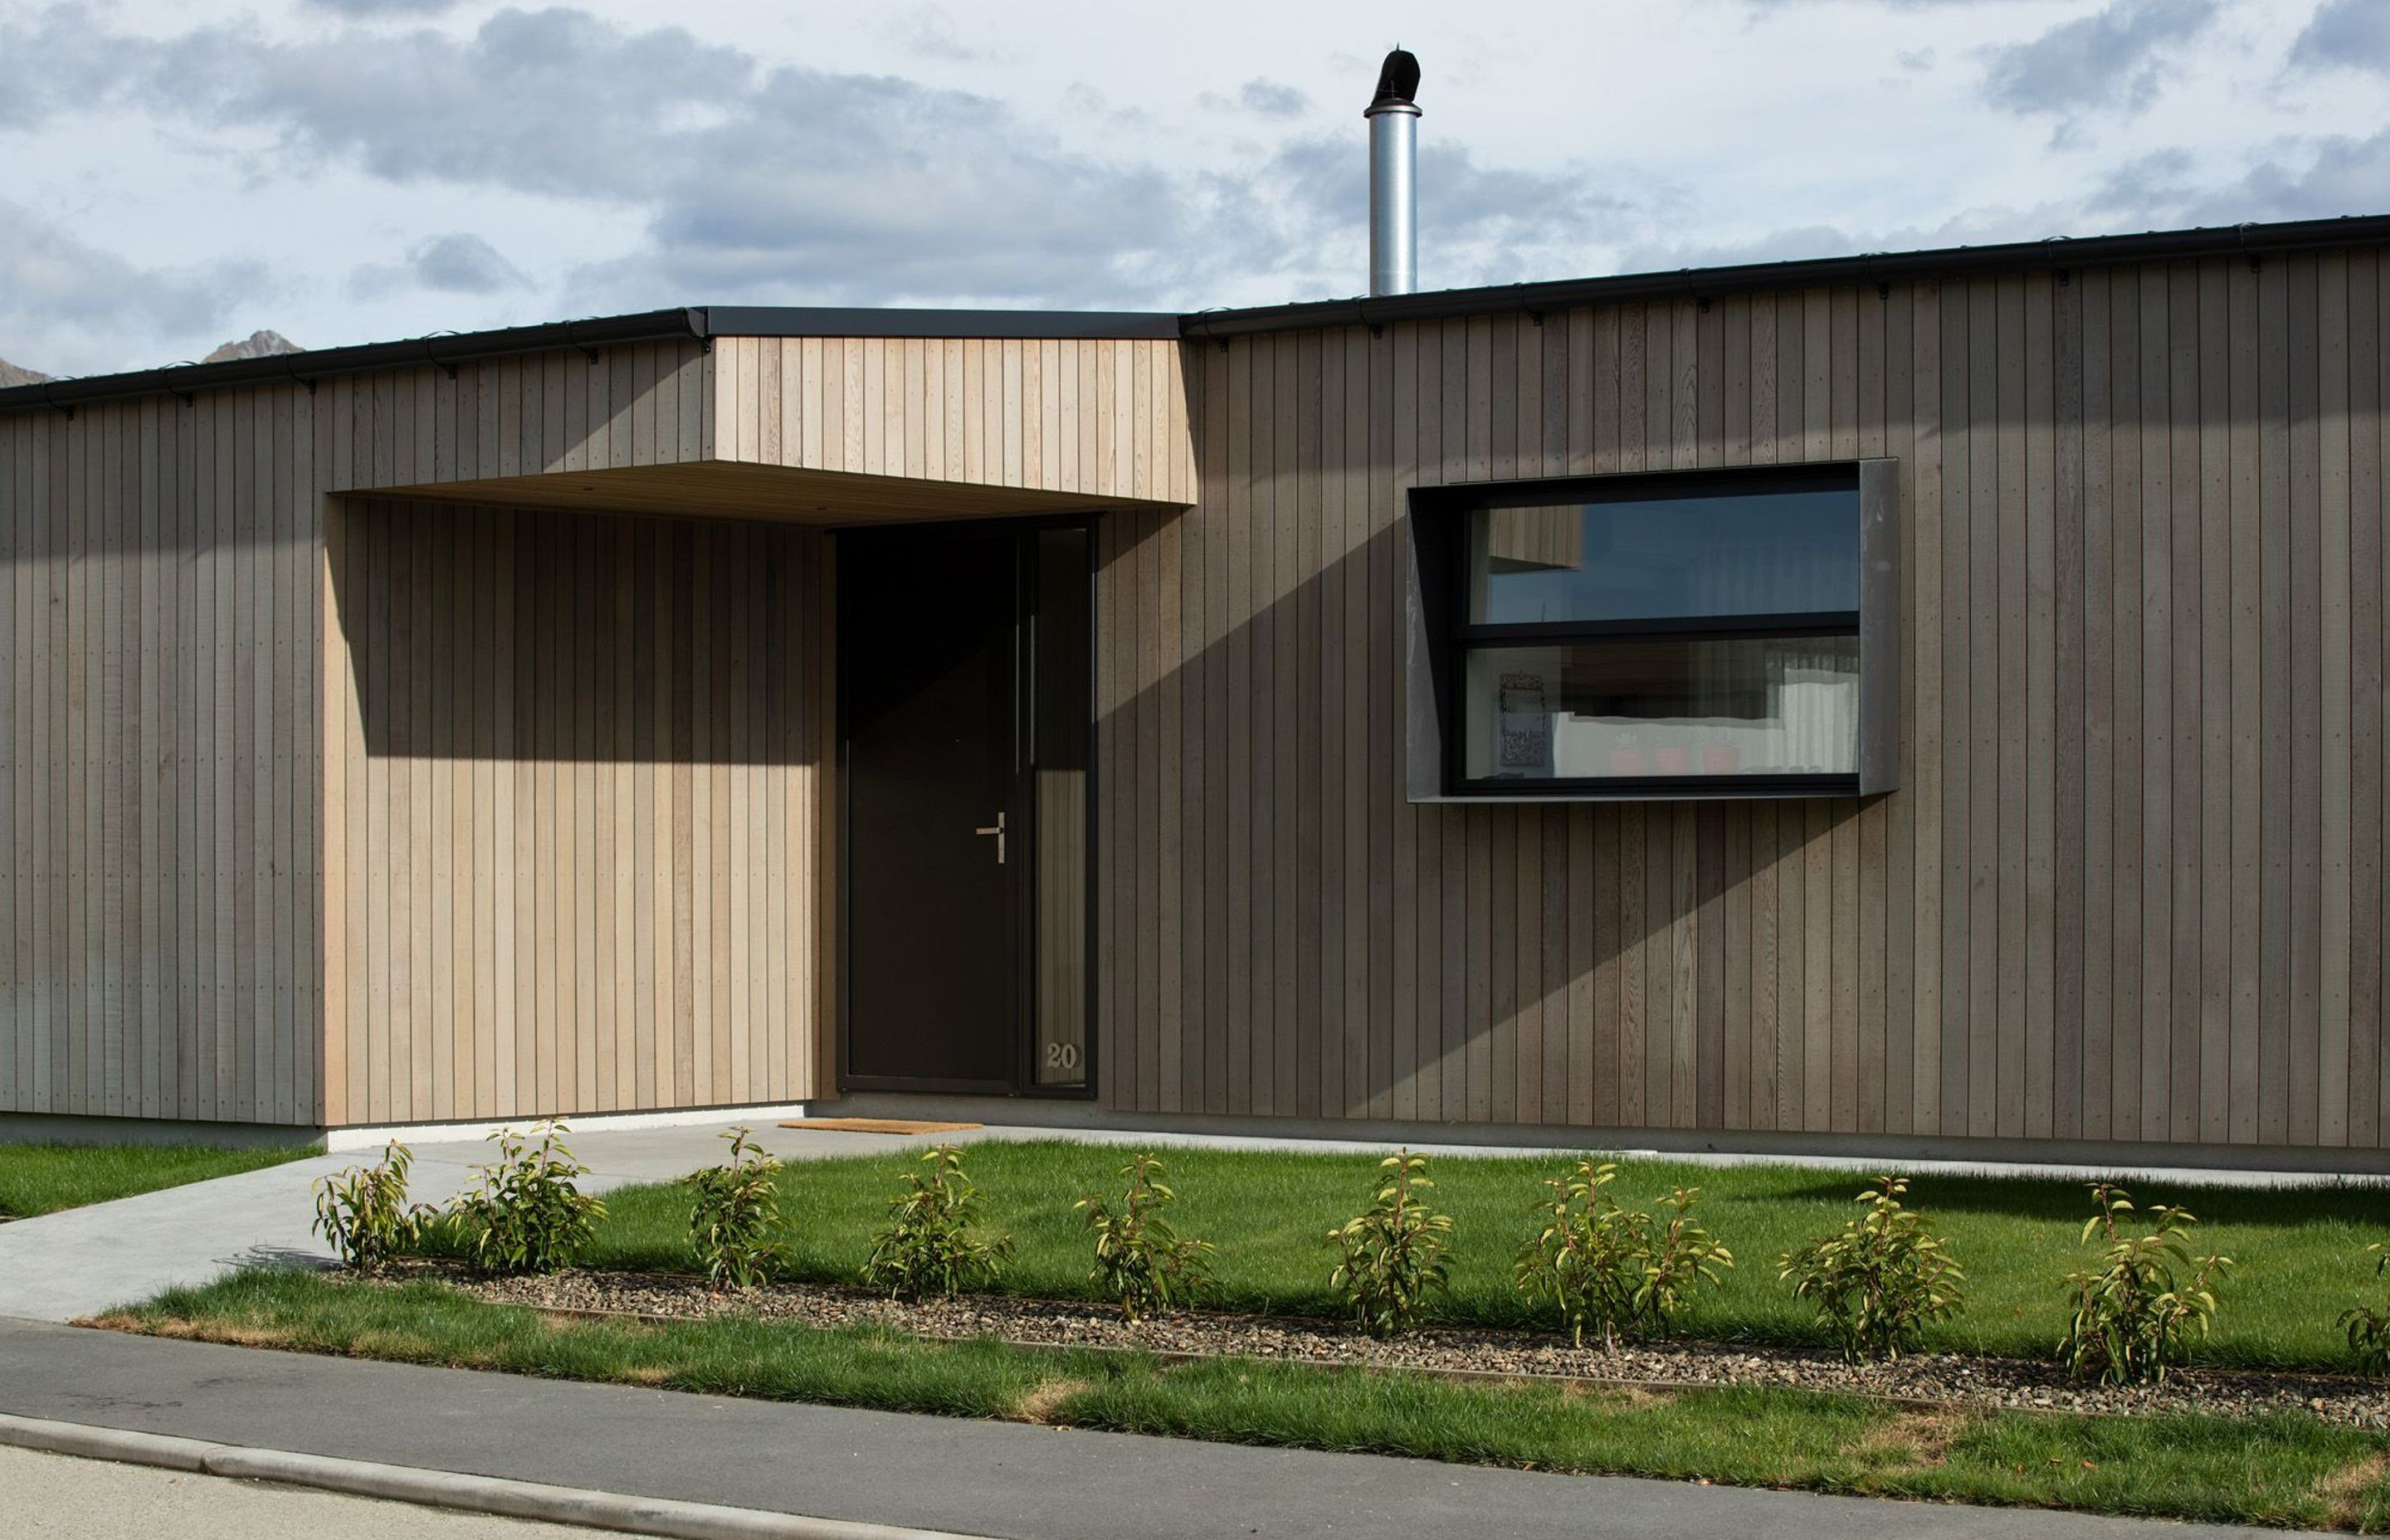 The timber cladding continues over this entrance, giving the home a seamless contemporary form.